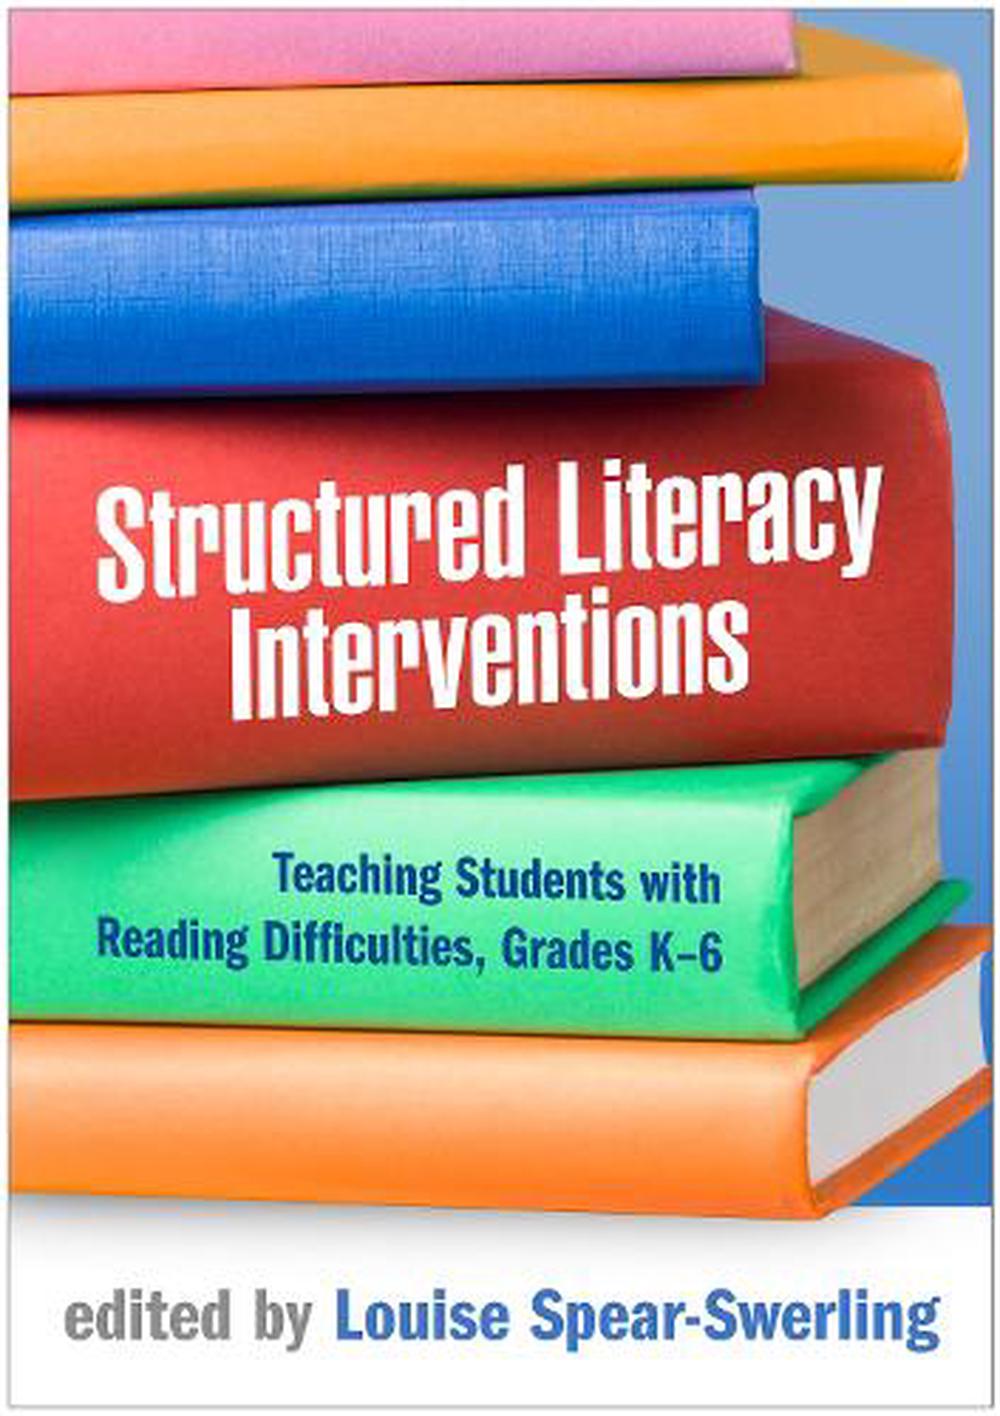 Paperback,　Louise　Nile　at　Literacy　Structured　Interventions　online　Buy　by　9781462548781　Spear-Swerling,　The